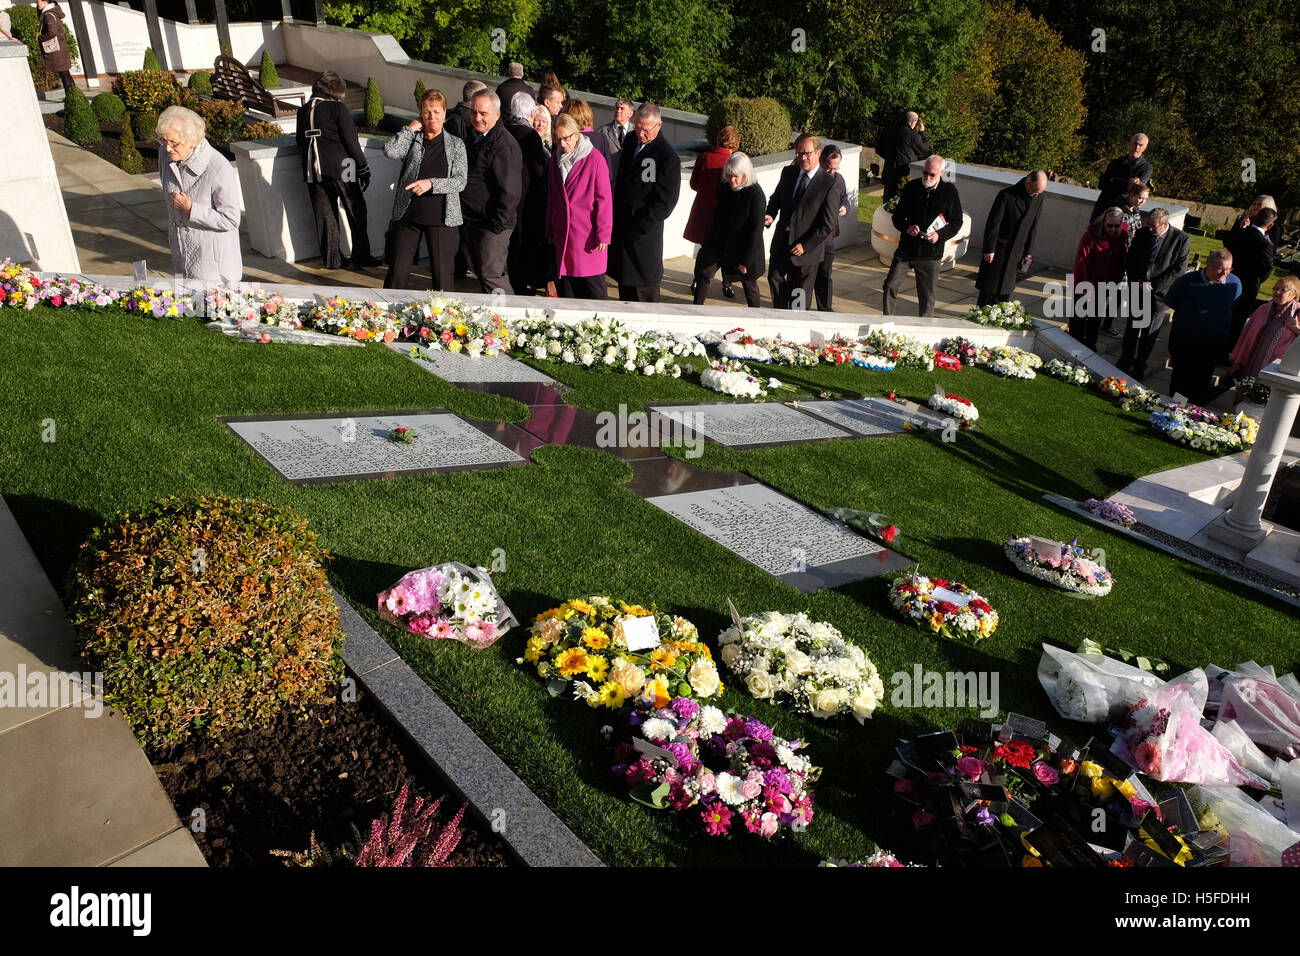 Aberfan, Wales - Friday 21st October 2016 - Relatives and villagers attend the cemetery in Aberfan to mark the 50th Anniversary of the terrible tragedy that took place on 21st October 1966. 144 people including 116 young children were killed when a mountain of coal waste slid down into the village and school. Credit:  Steven May/Alamy Live News Stock Photo